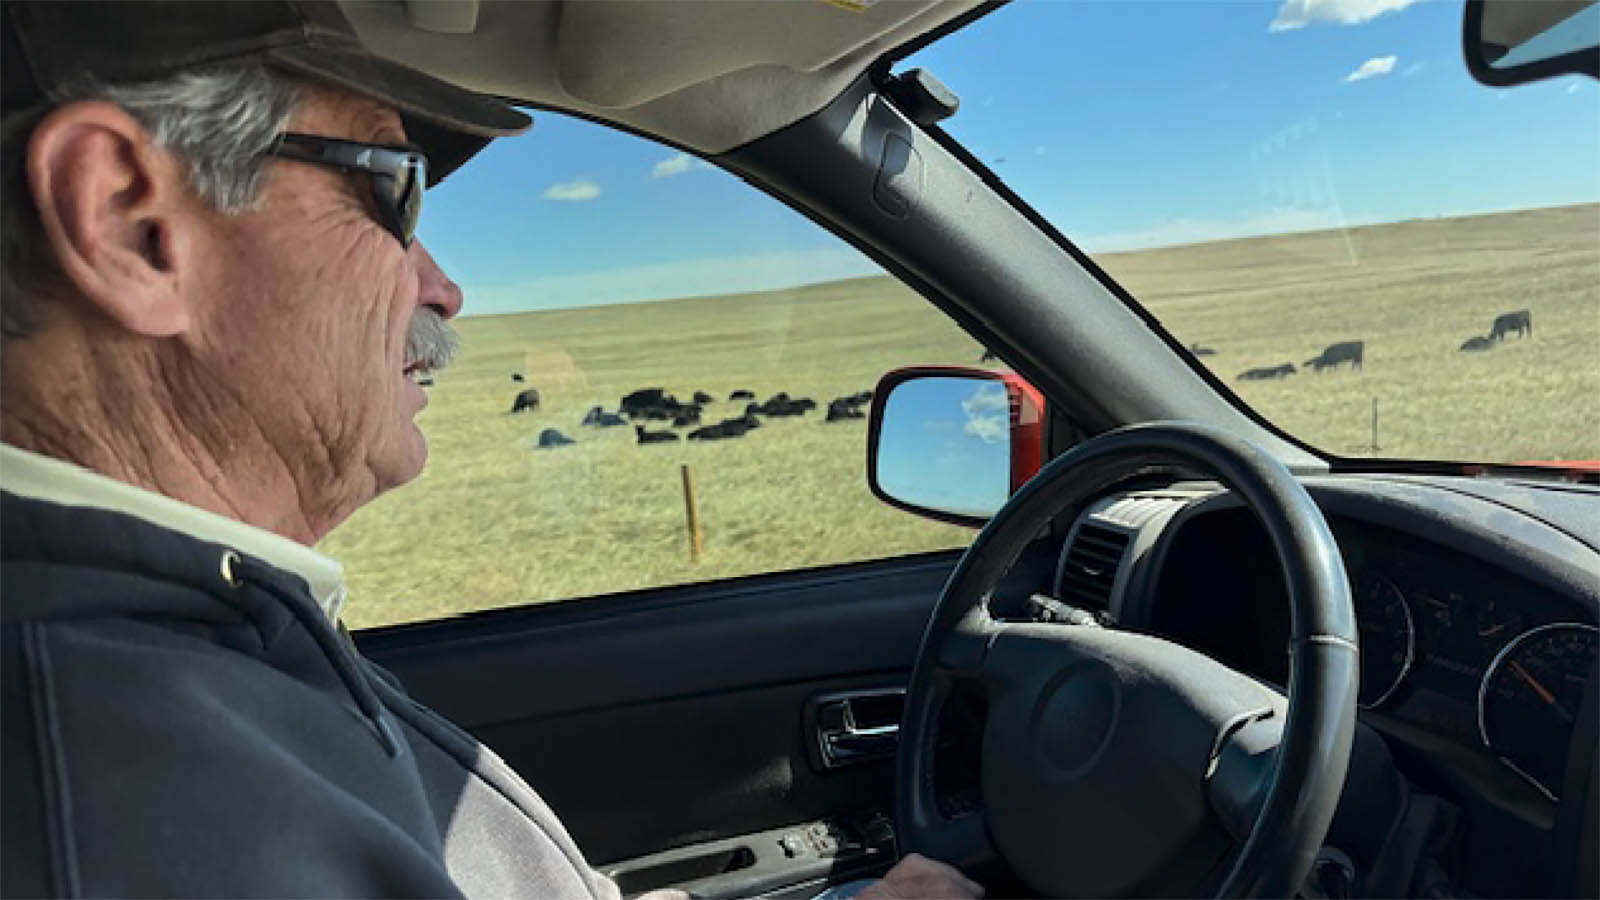 South Cheyenne rancher Ed Prosser drives past Black Angus cattle feeding on prairie grass near his 2,800-acre ranch. Canada energy giant Enbridge Inc. plans to build a $1.2 billion solar farm to the north and east of his land.